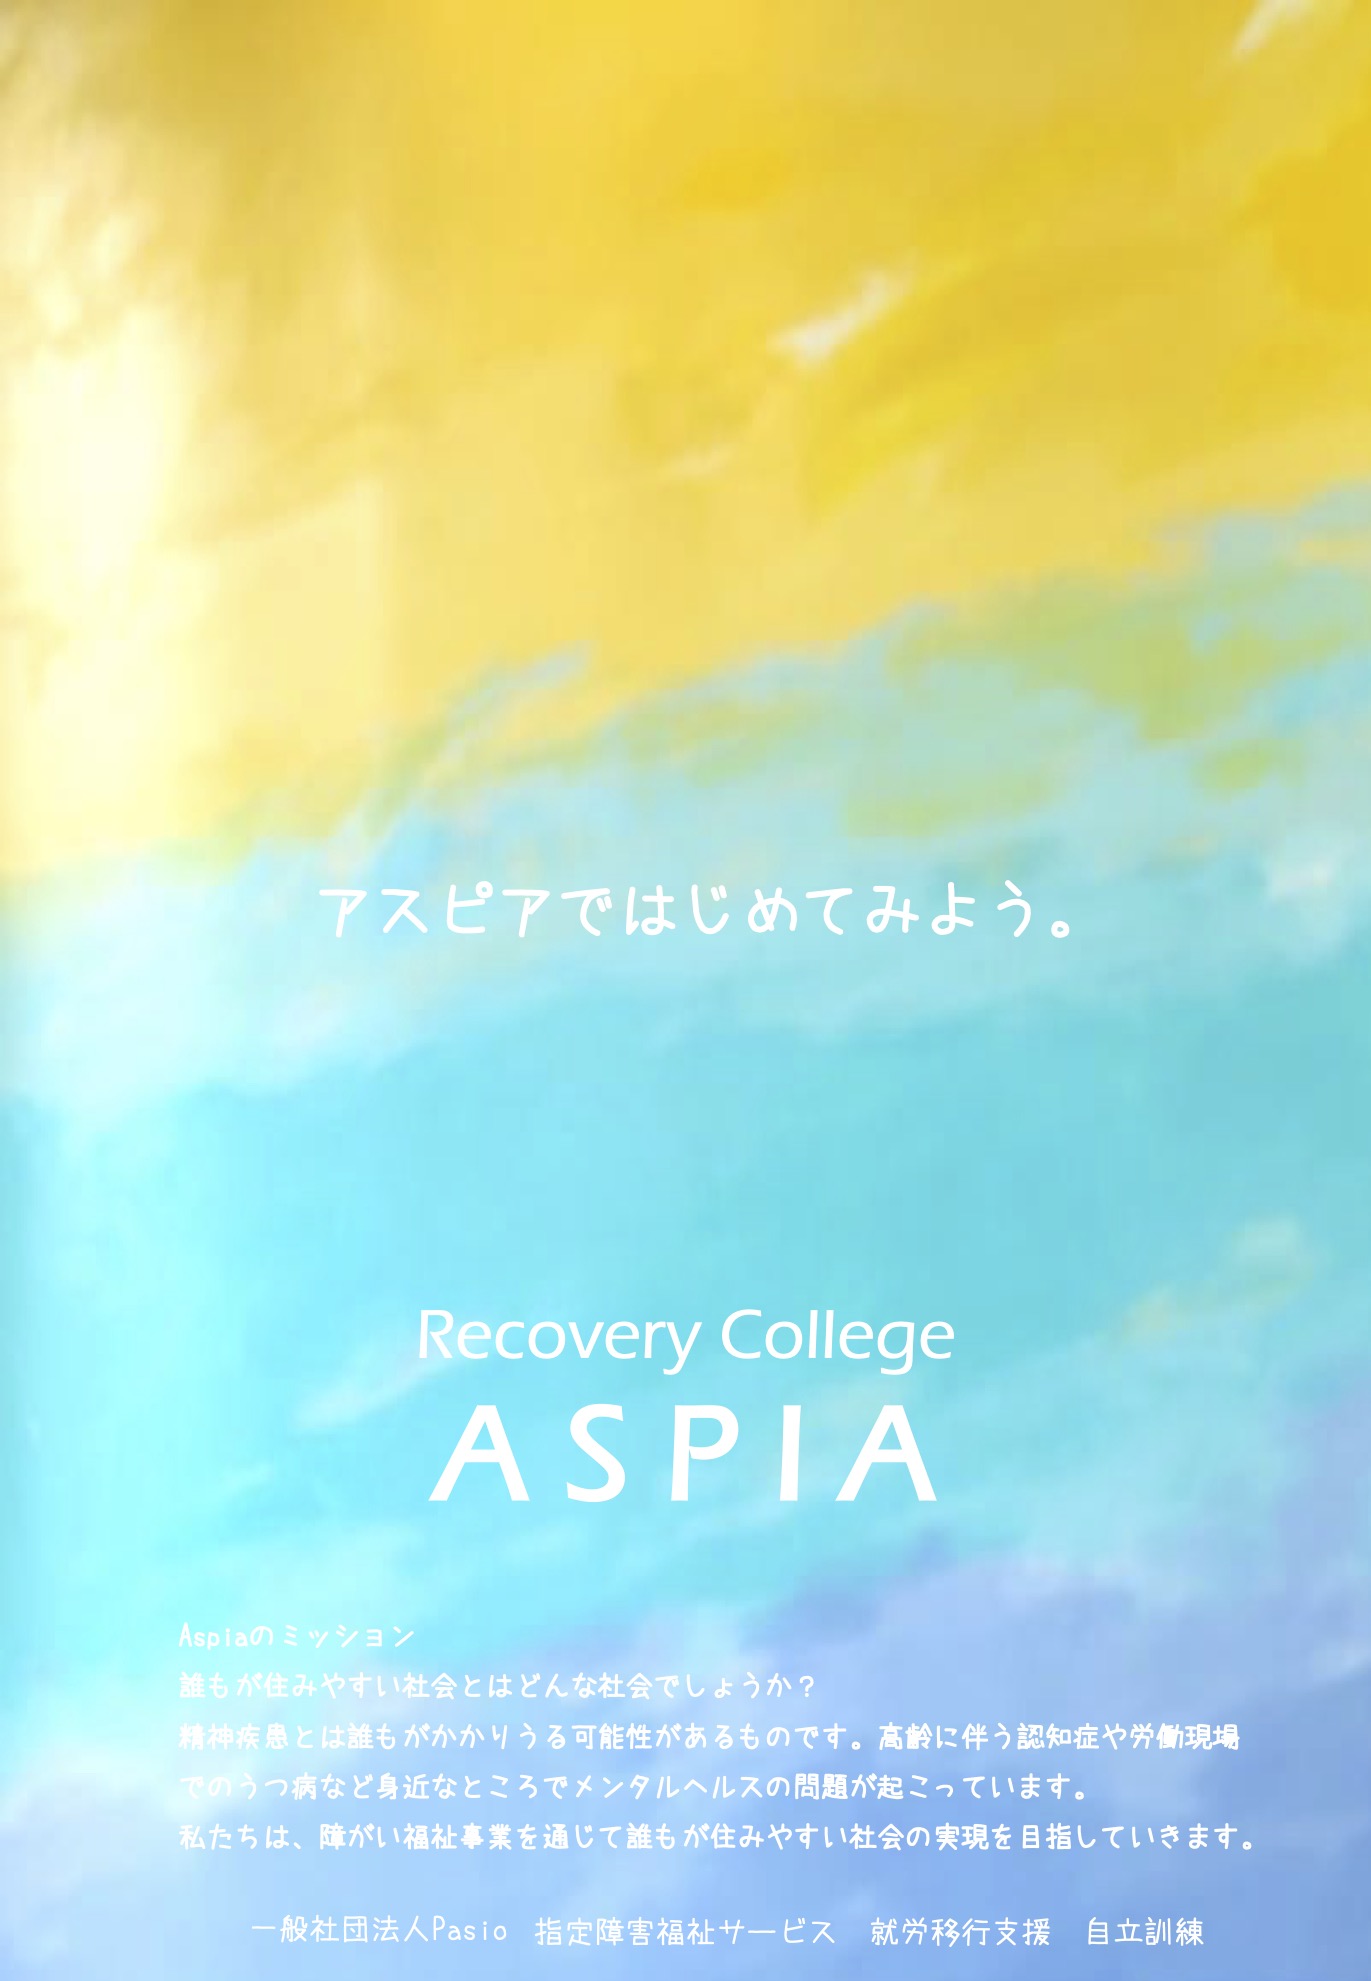 Recovery College ASPIAパンフレット